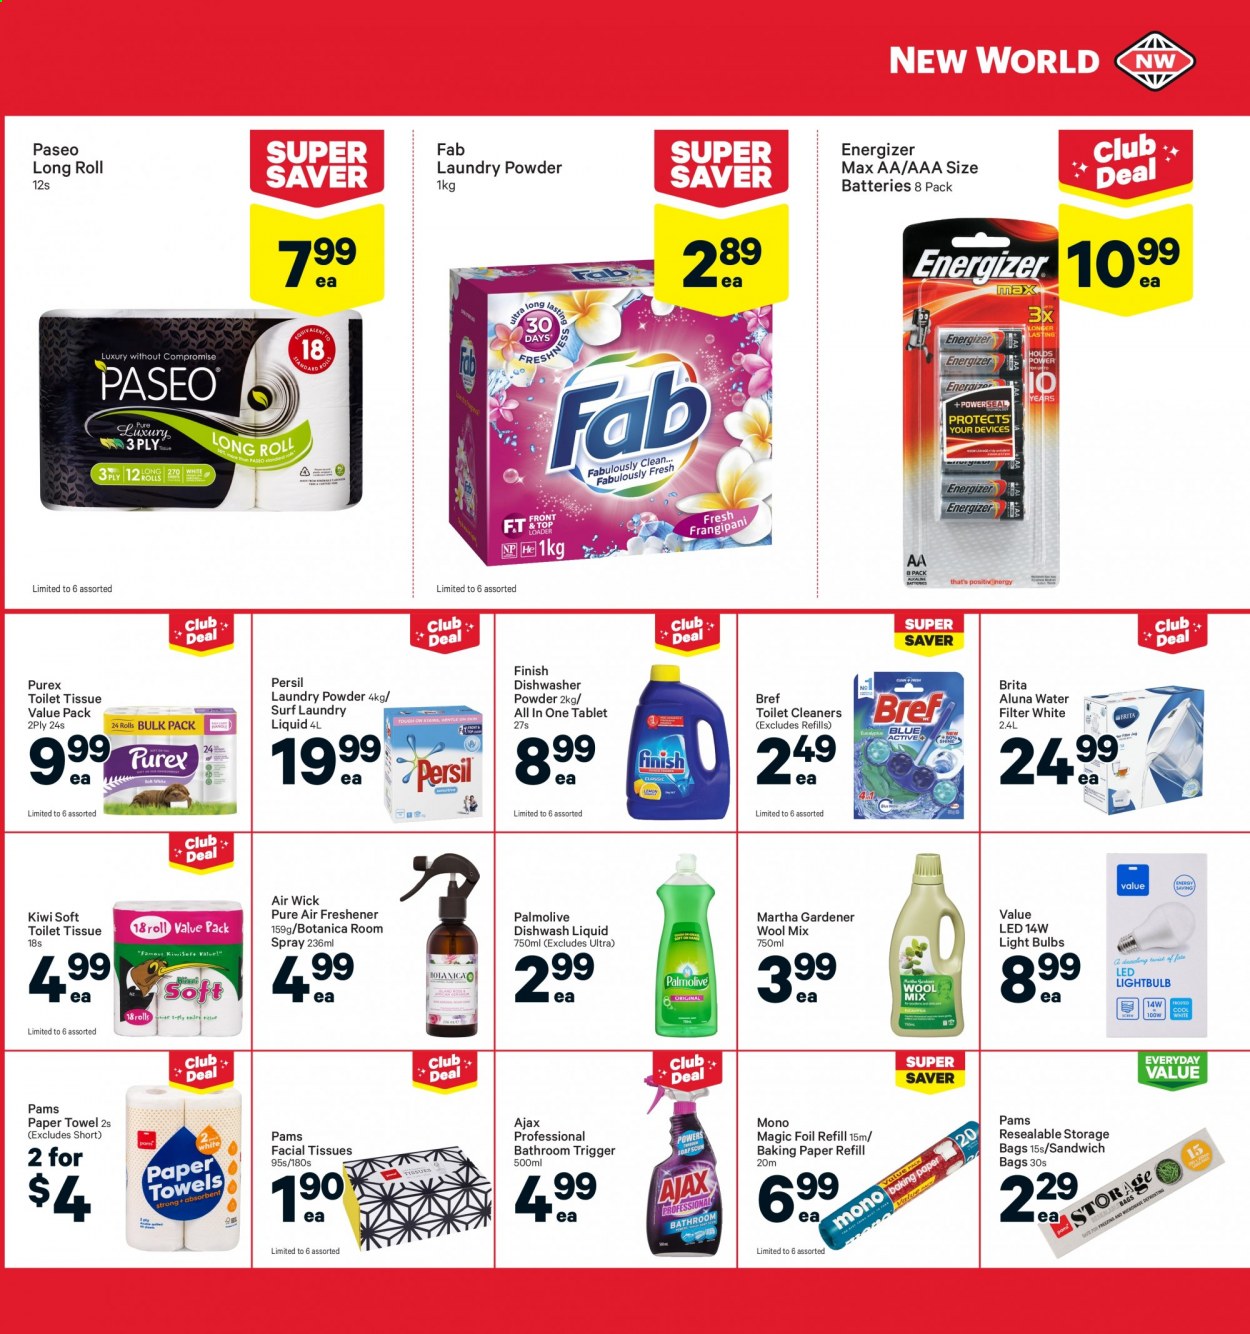 thumbnail - New World mailer - 14.06.2021 - 20.06.2021 - Sales products - kiwi, toilet paper, paper towels, Palmolive, facial tissues. Page 29.